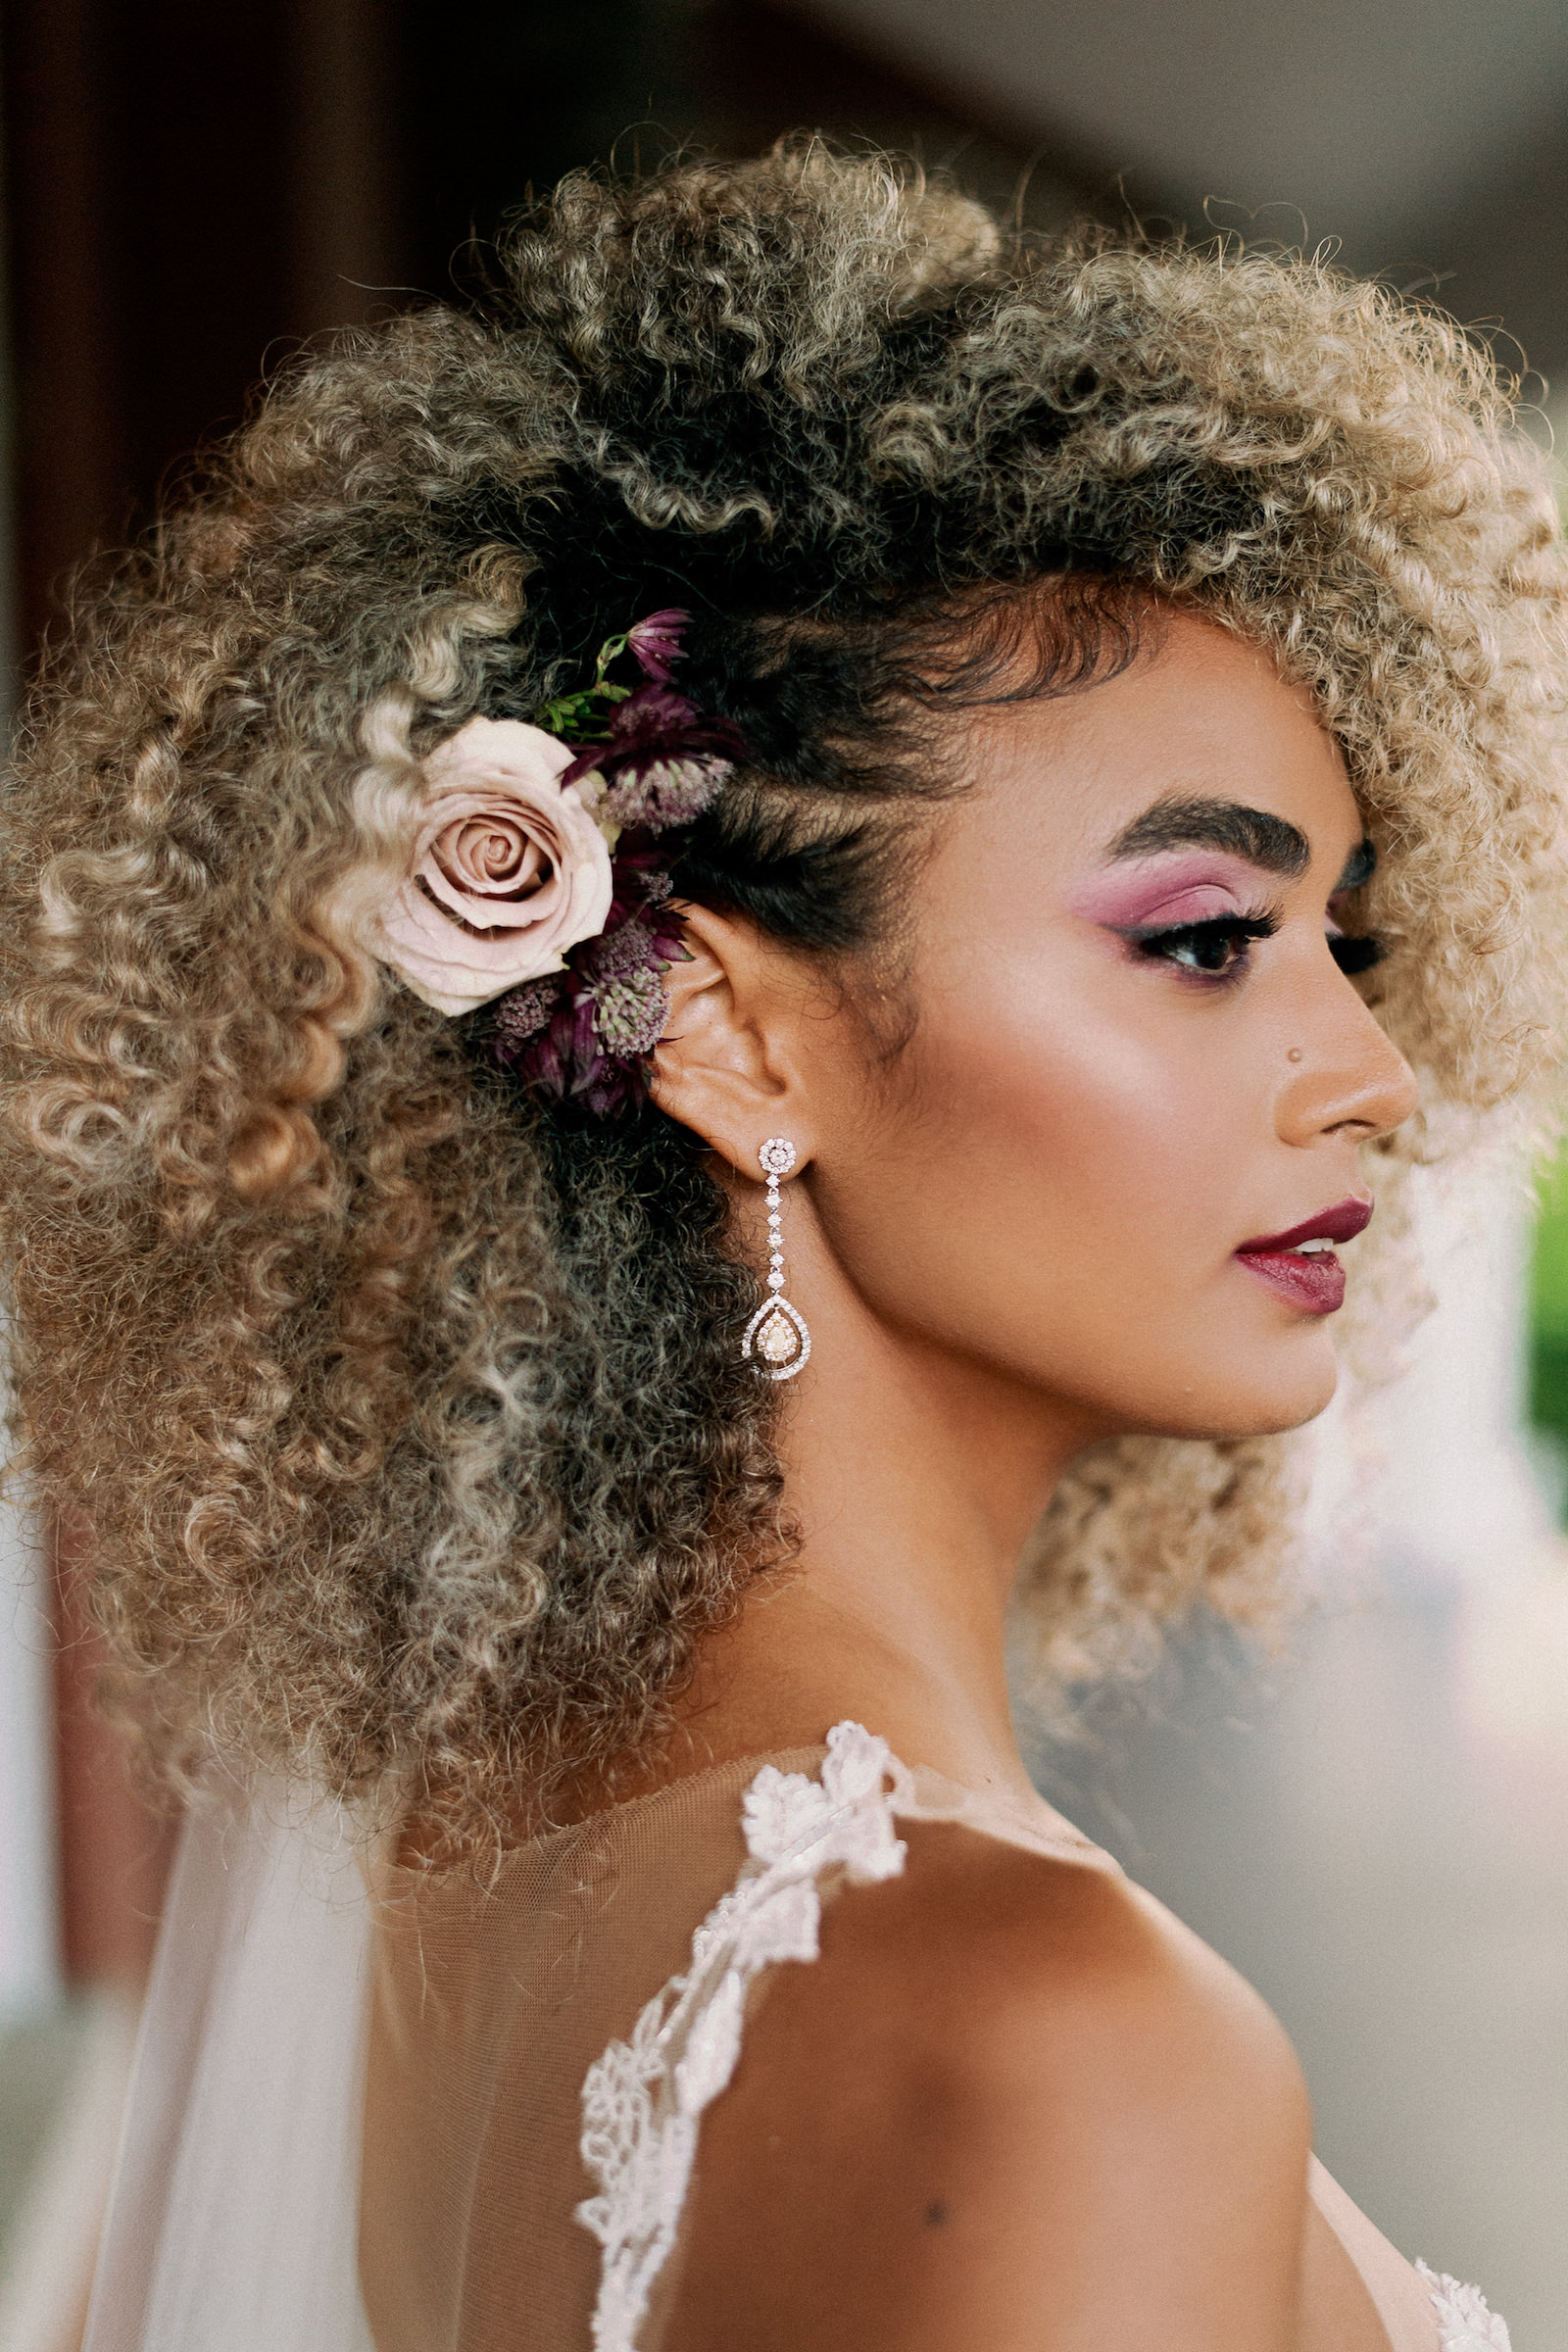 Vintage European Bride with Blush Pink Rose in Hair and Pink Eyeshadow, Bridal Beauty Portrait | Tampa Bay Wedding Photographer Dewitt for Love